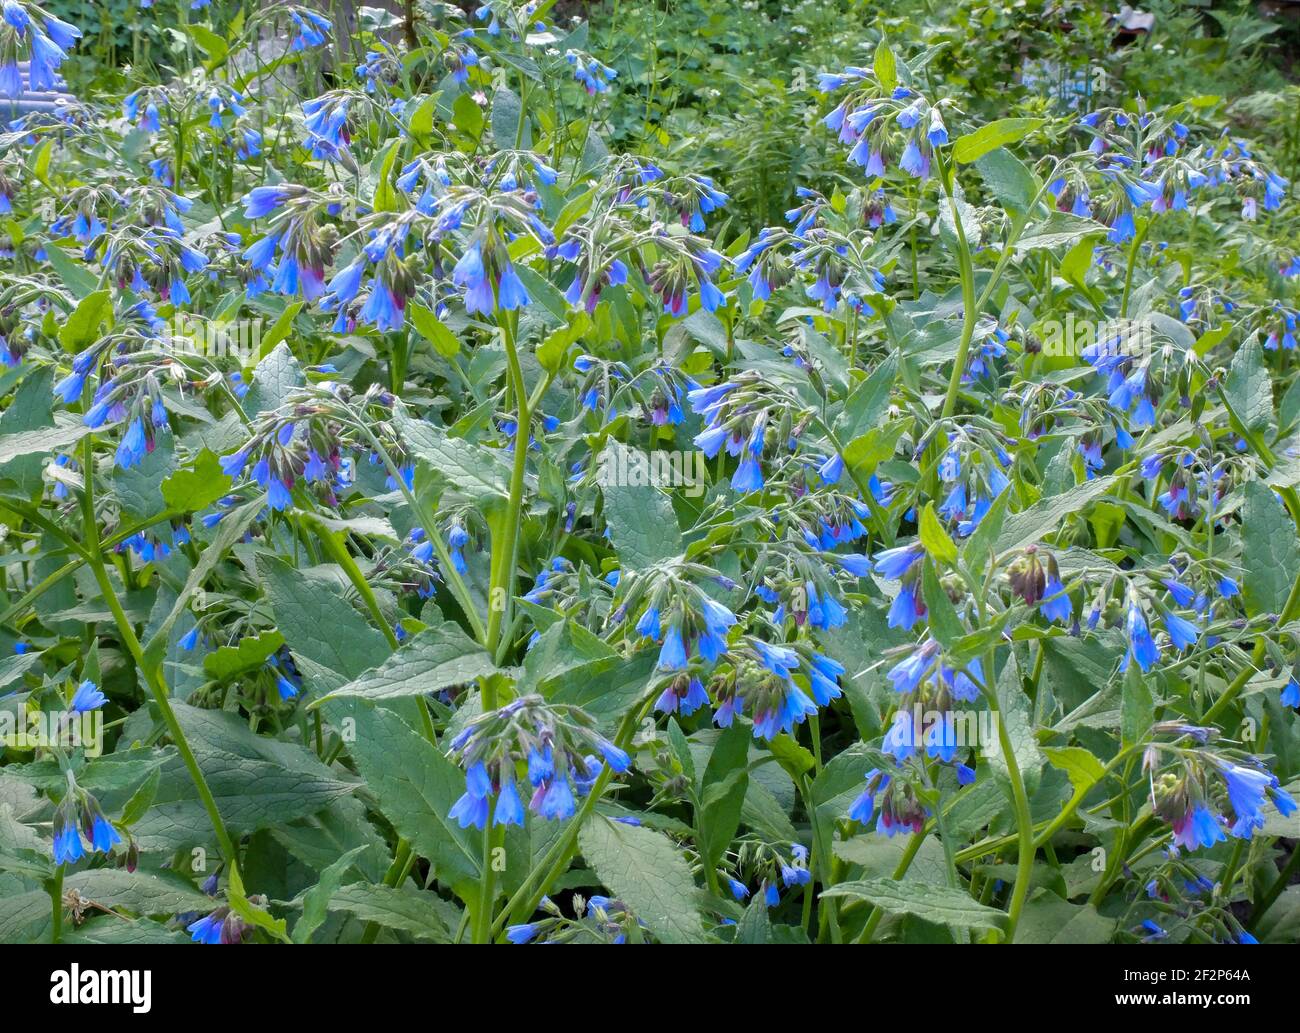 Comfrey (Symphytum officinale) with blue flowers Stock Photo